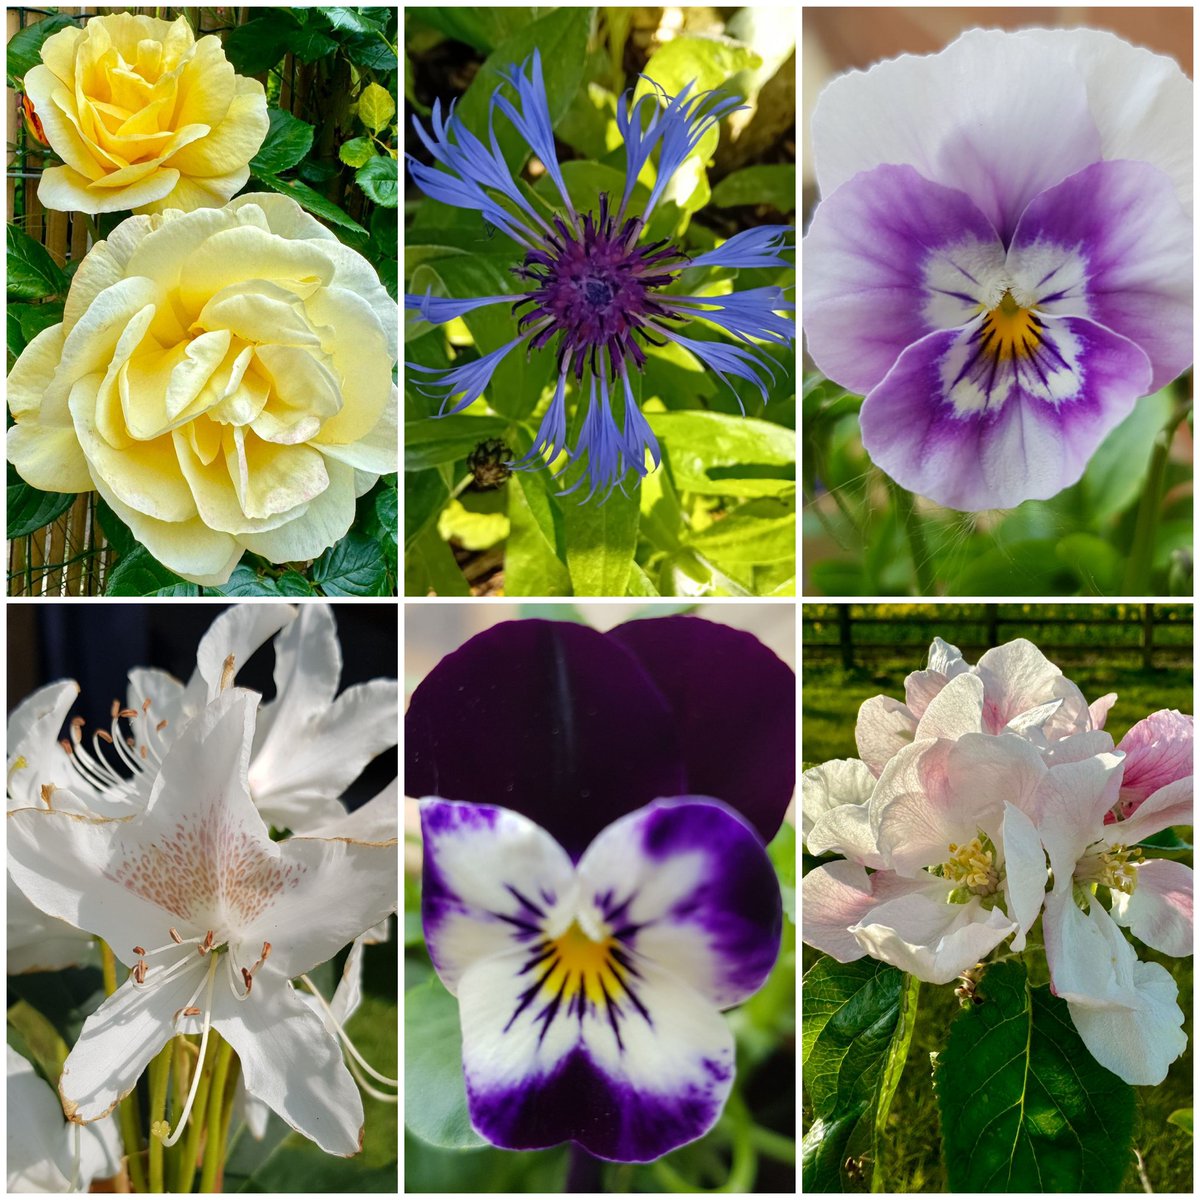 Happy Saturday 🌞 here's my six  for #sixonsaturday #flowers #nature #gardening there are so many beautiful things in nature to appreciate 💚 #blessed